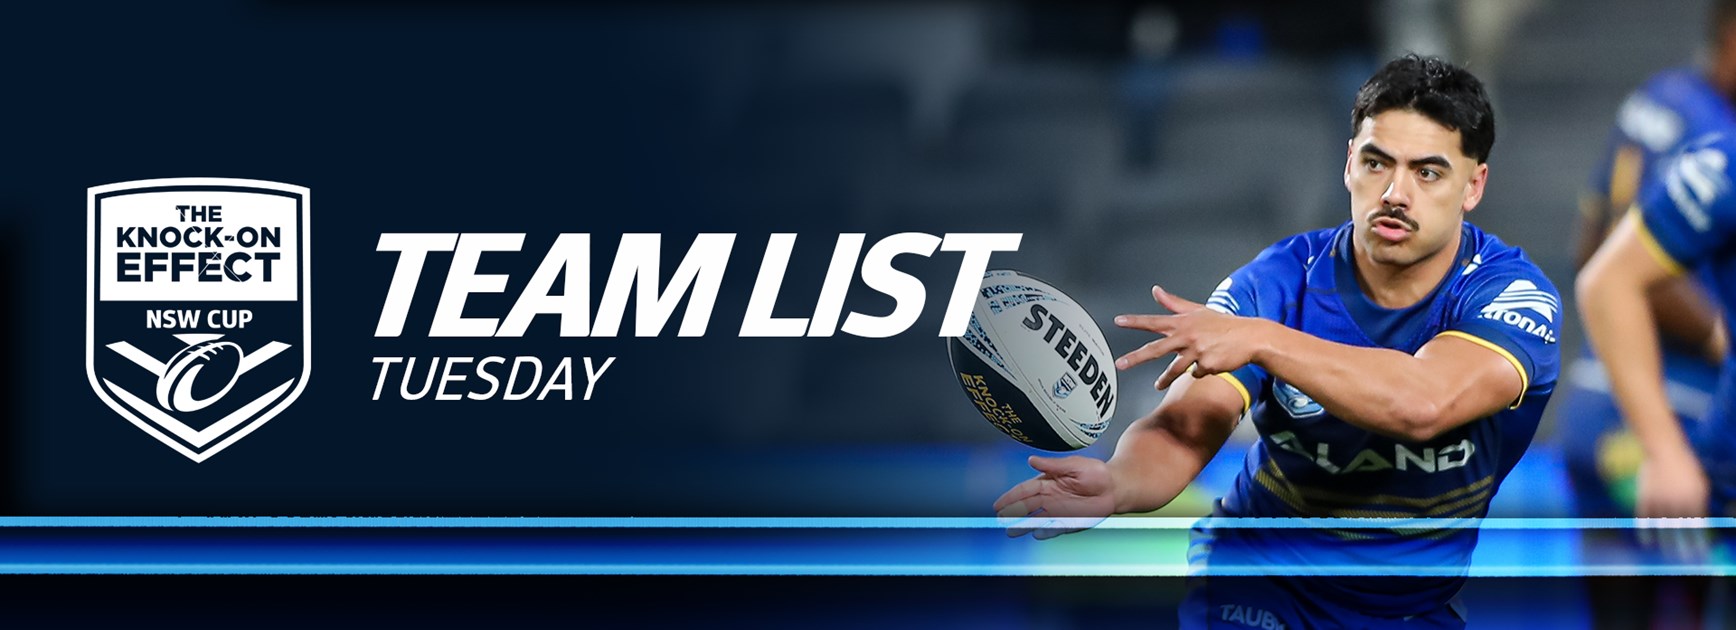 Team List Tuesday | The Knock-On Effect NSW Cup - Round 16